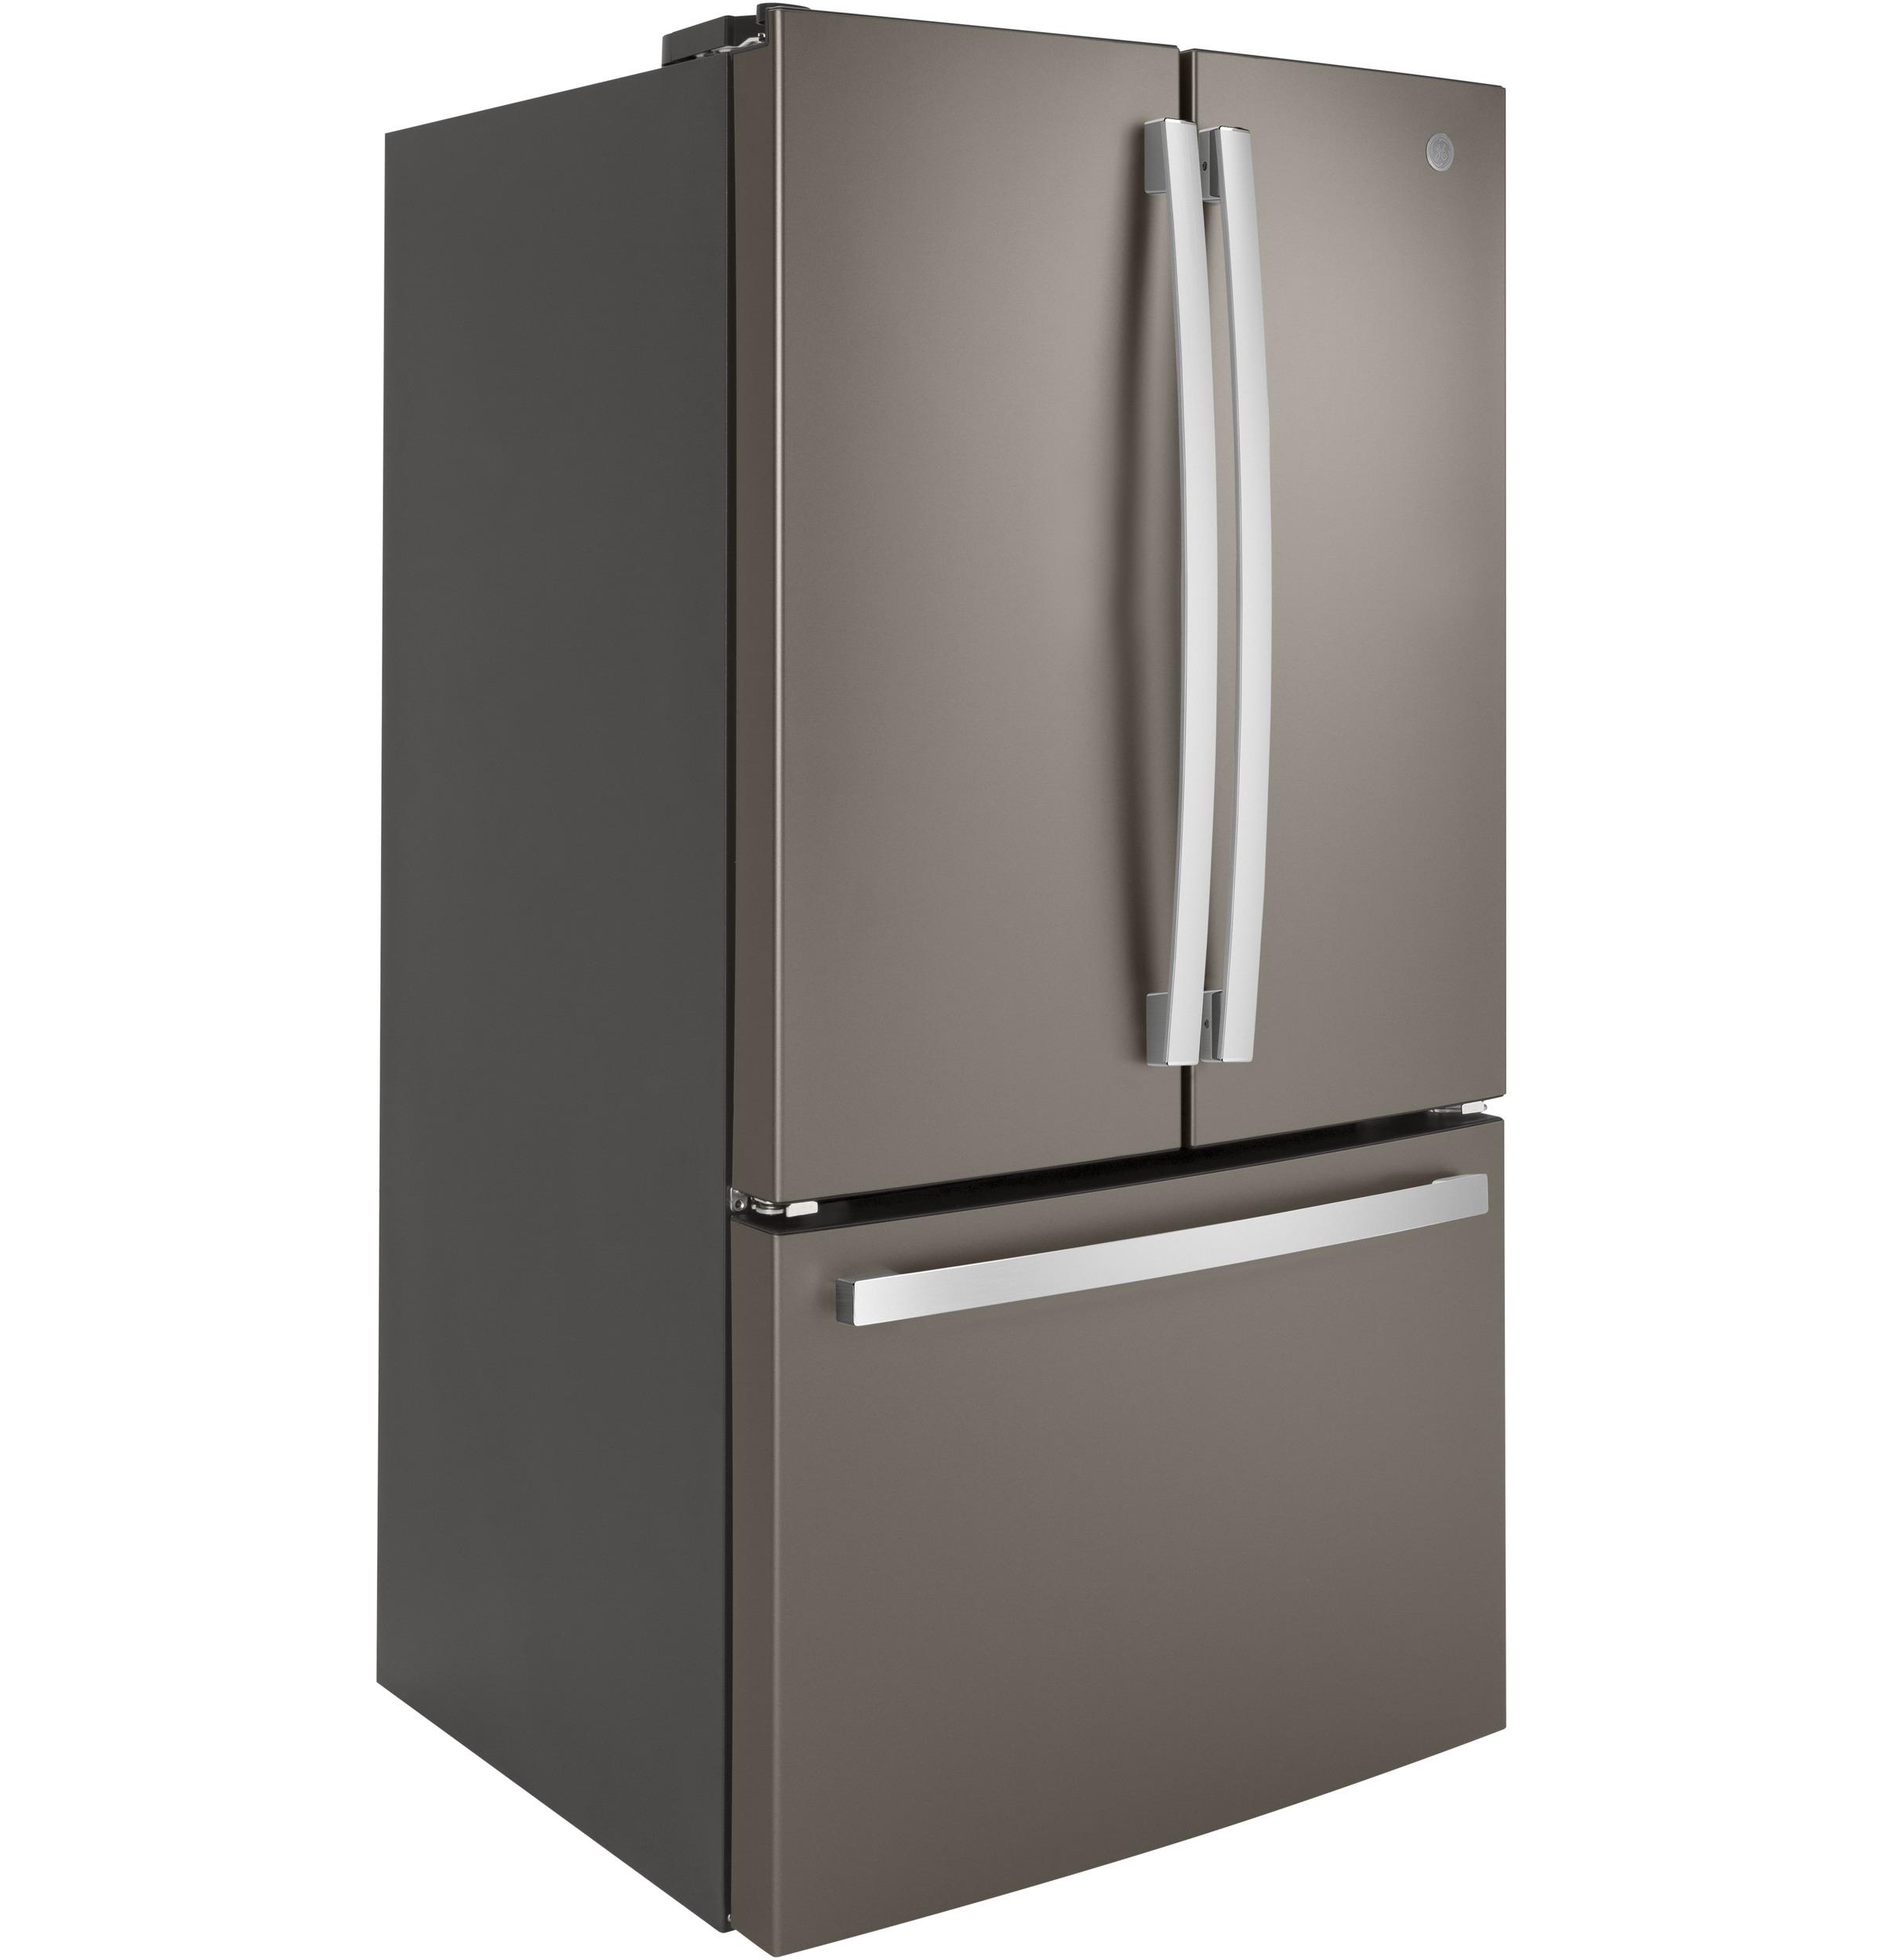 GE GNE27JMMES 36 French Door Refrigerator with 27 cu. ft. Total Capacity in Slate - image 4 of 5